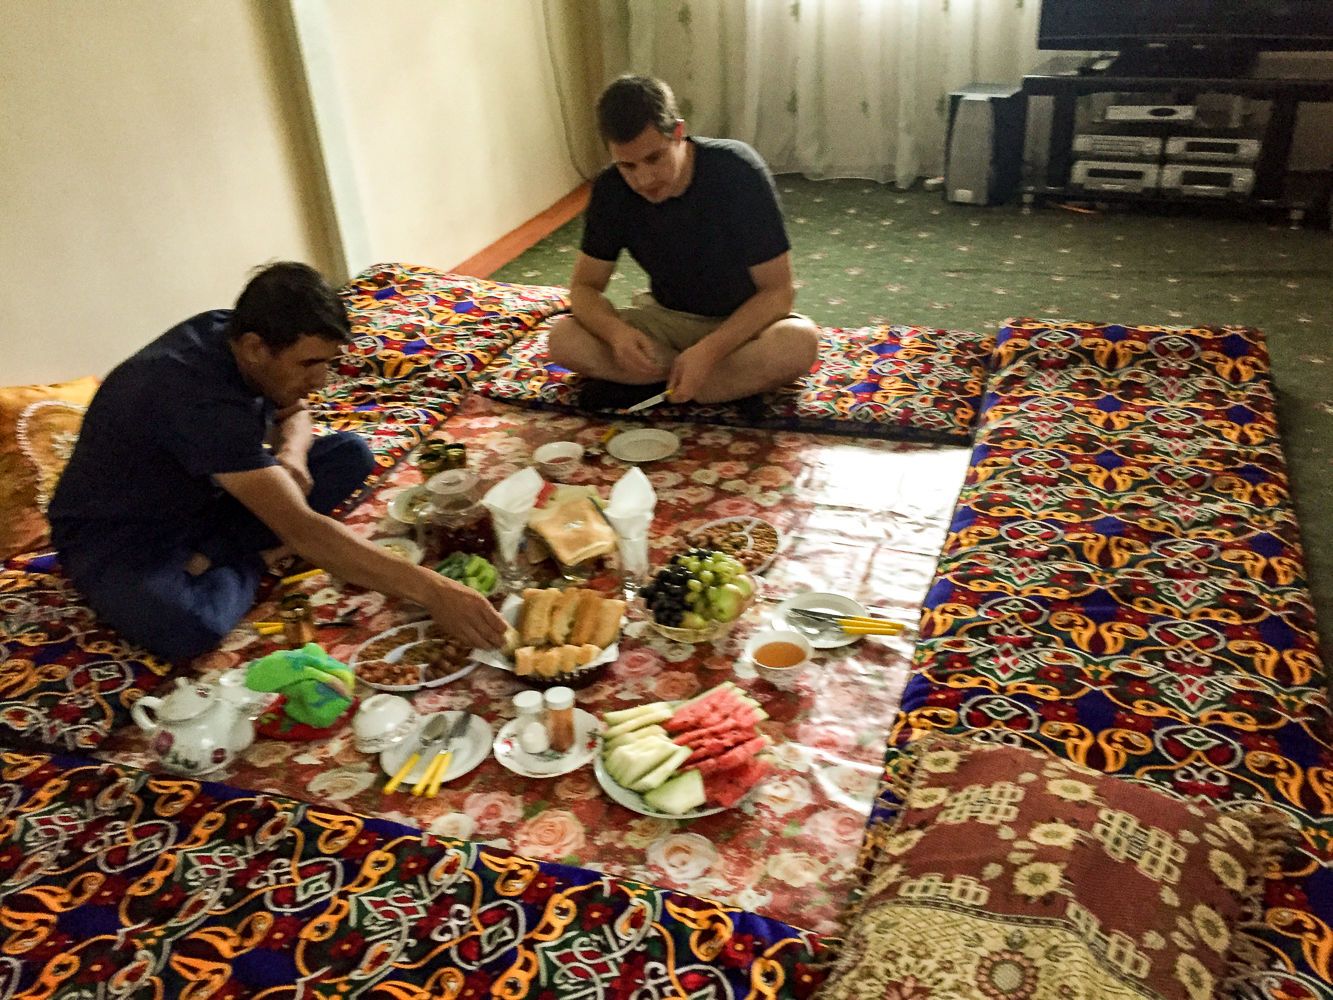 Tourists eating at dastarkhan in Central Asia